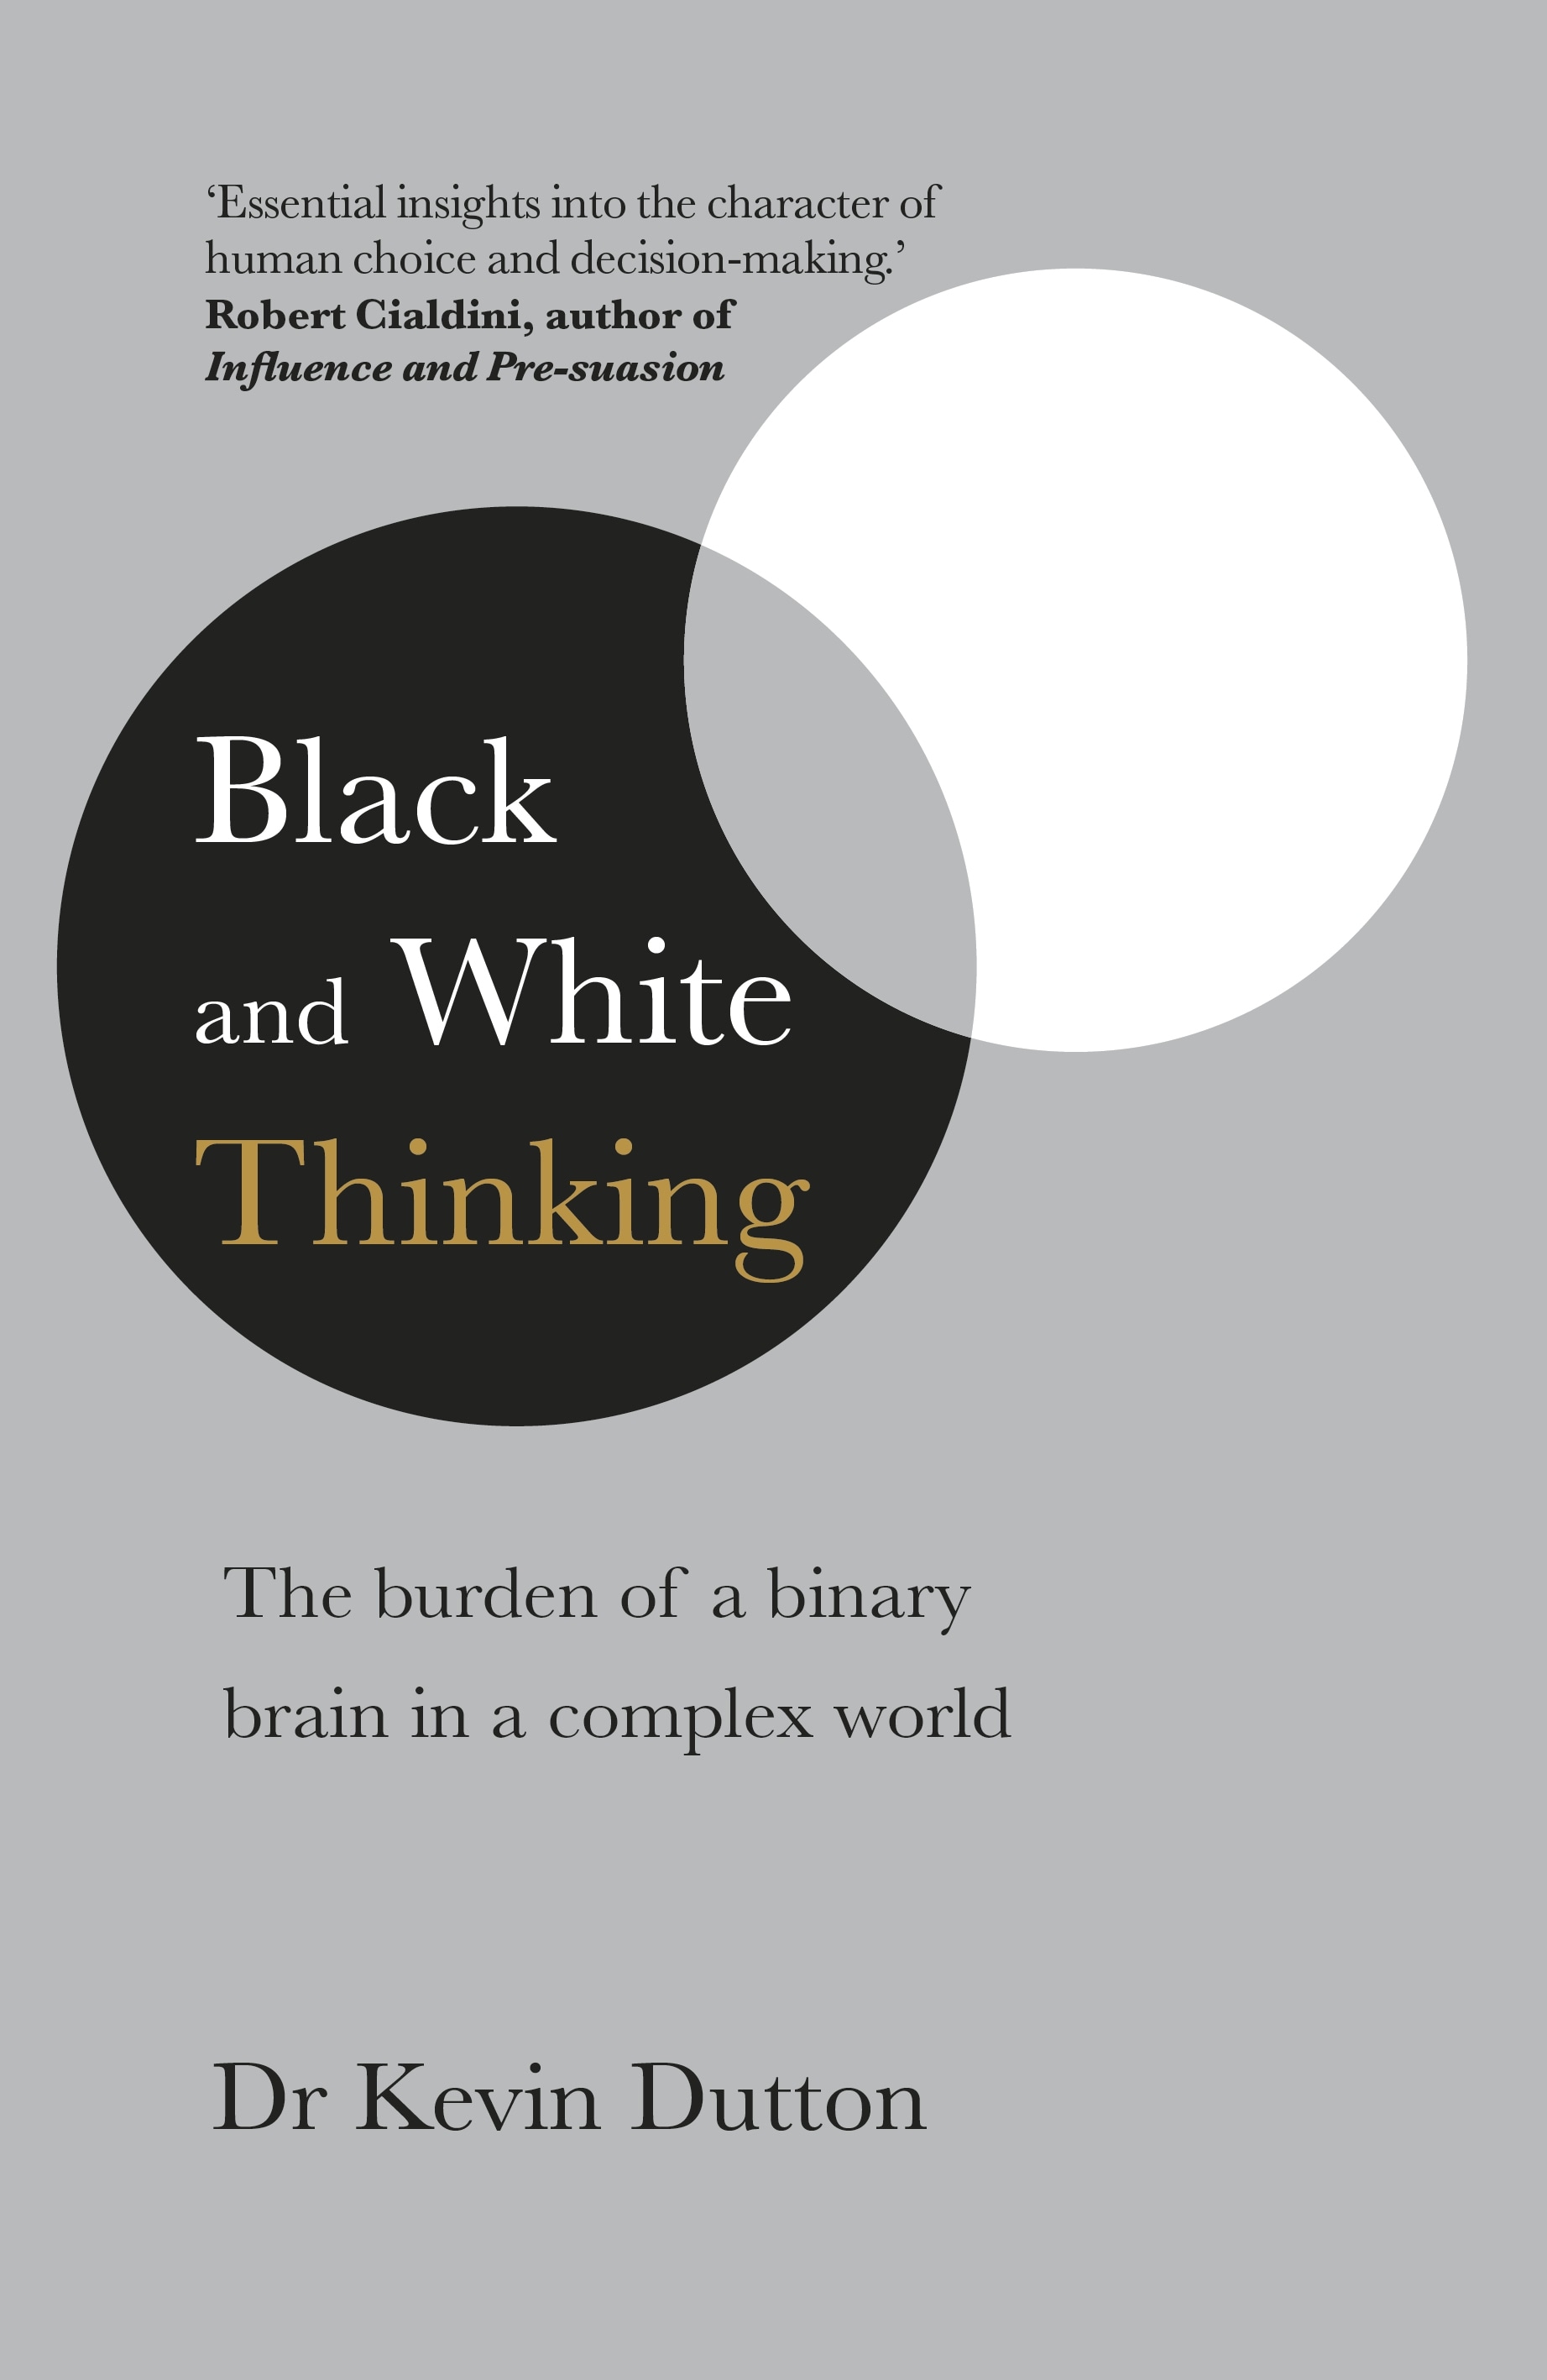 Book “Black and White Thinking” by Kevin Dutton — August 27, 2020